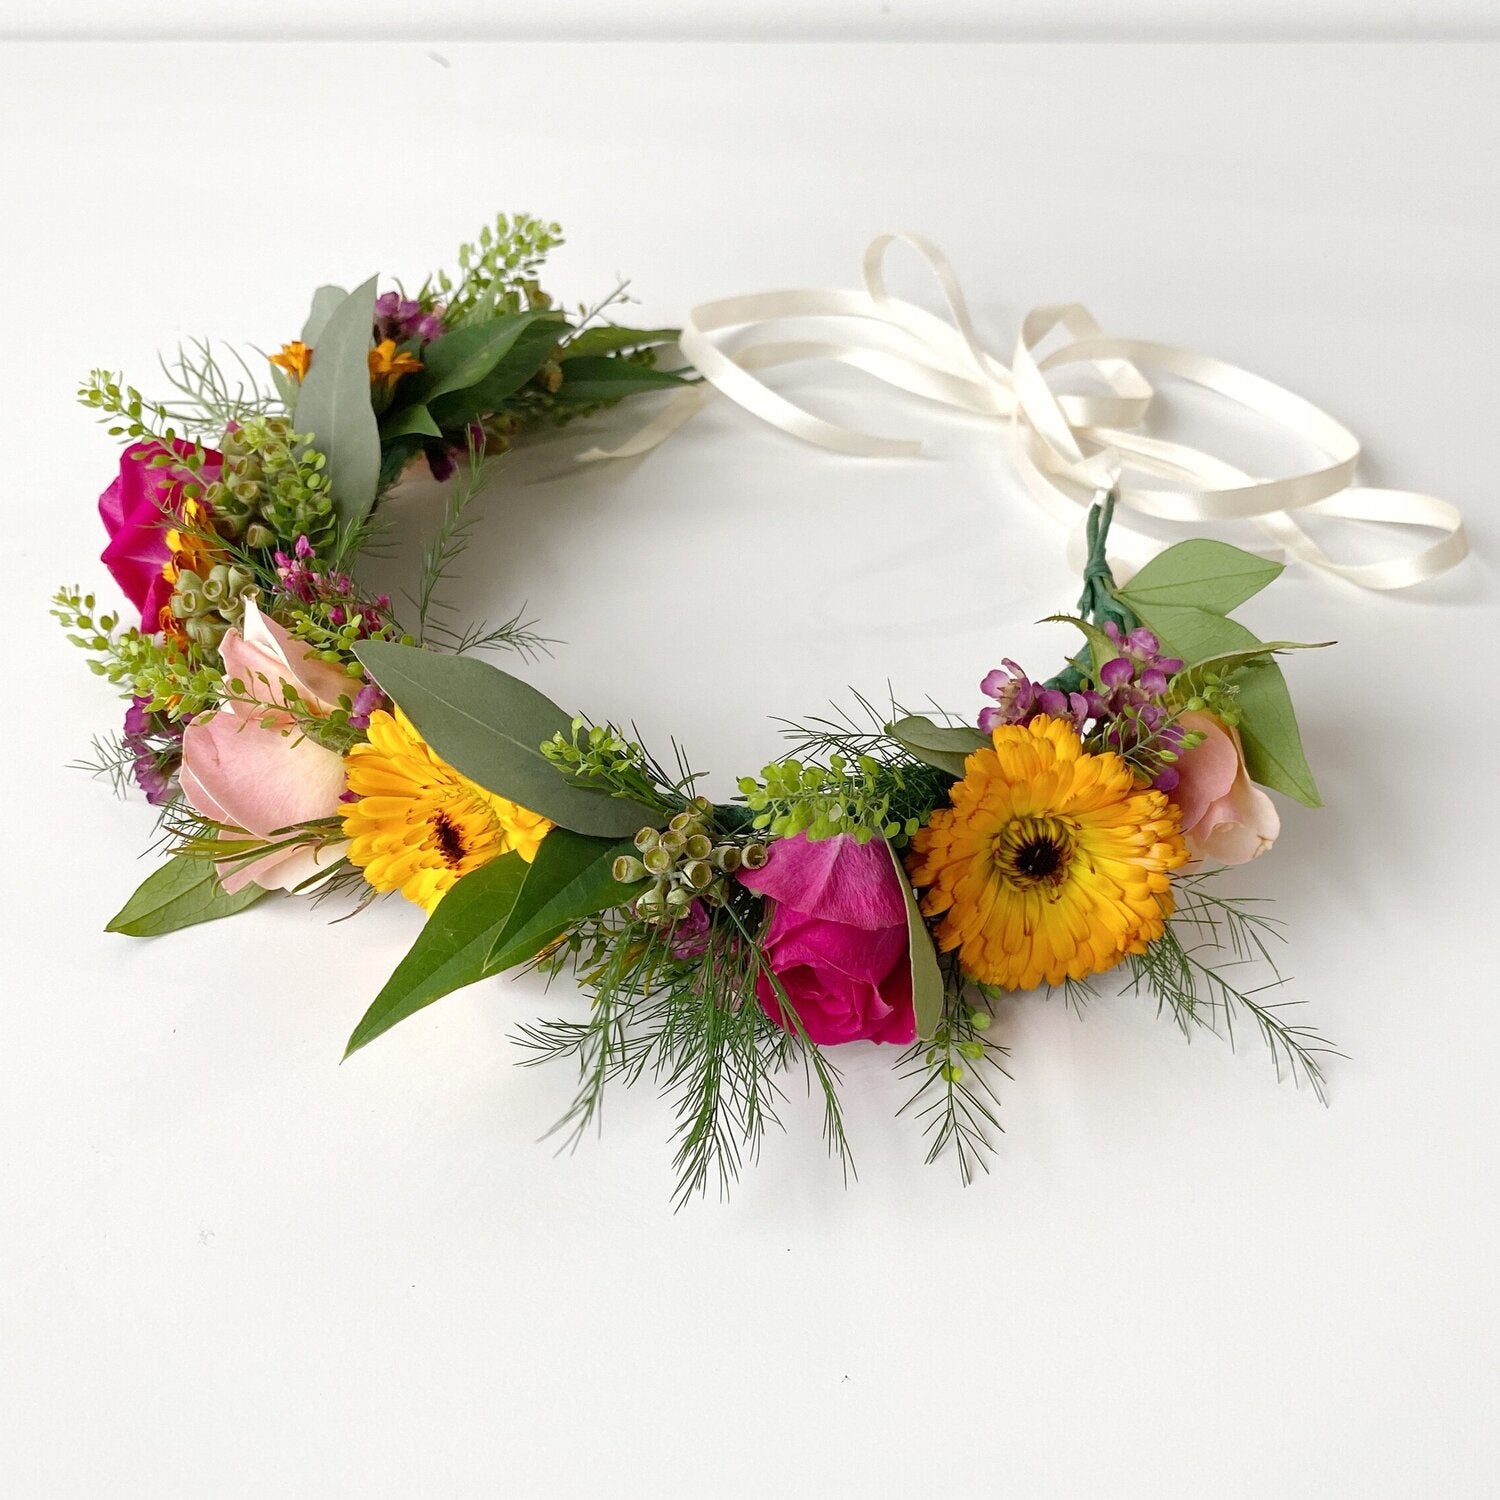 Flower crown tied with white satin ribbon featuring multiple types of fresh cut flowers.  Arranged in Memphis, TN by Everbloom Design.